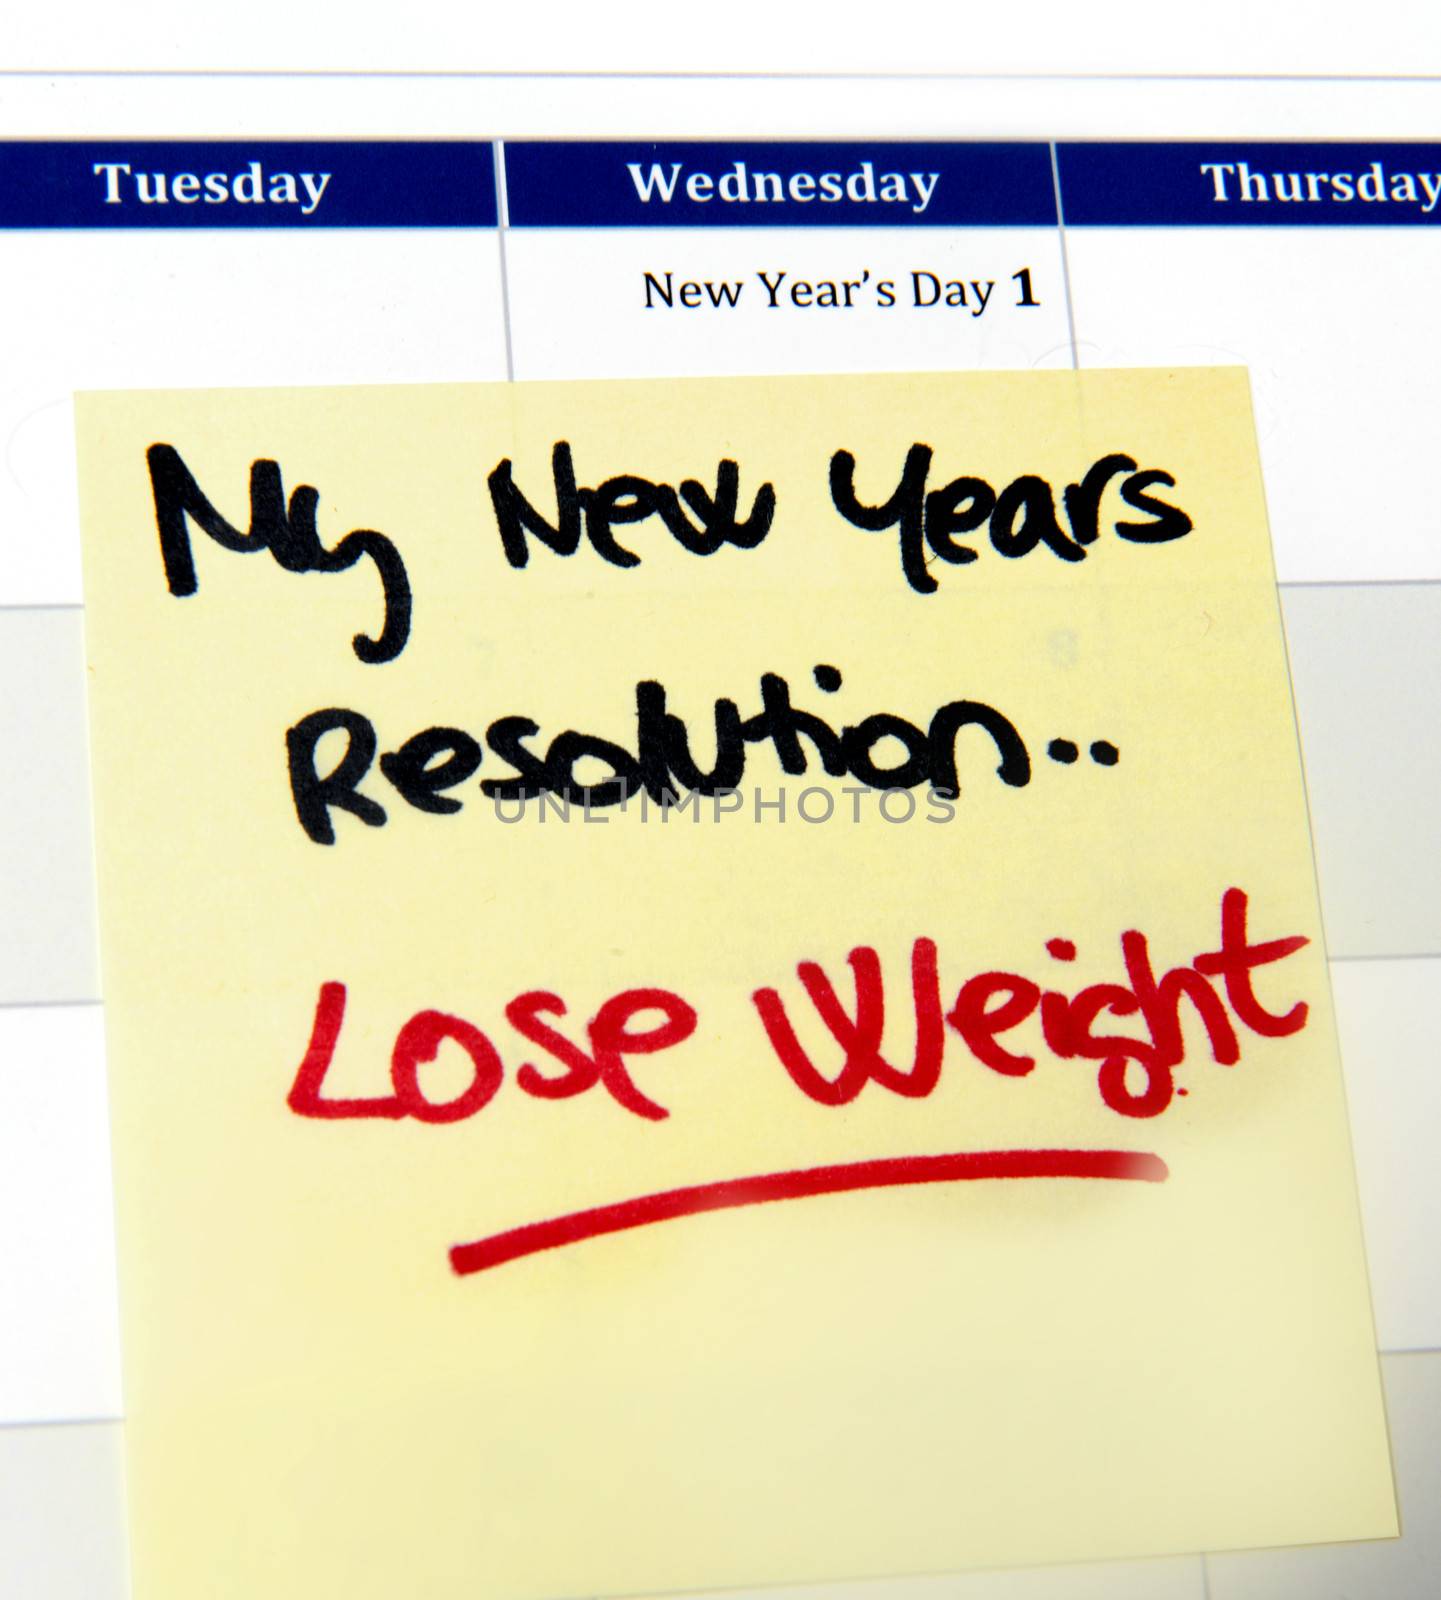 New Years Resolution Lose Weight postit note on Calendar